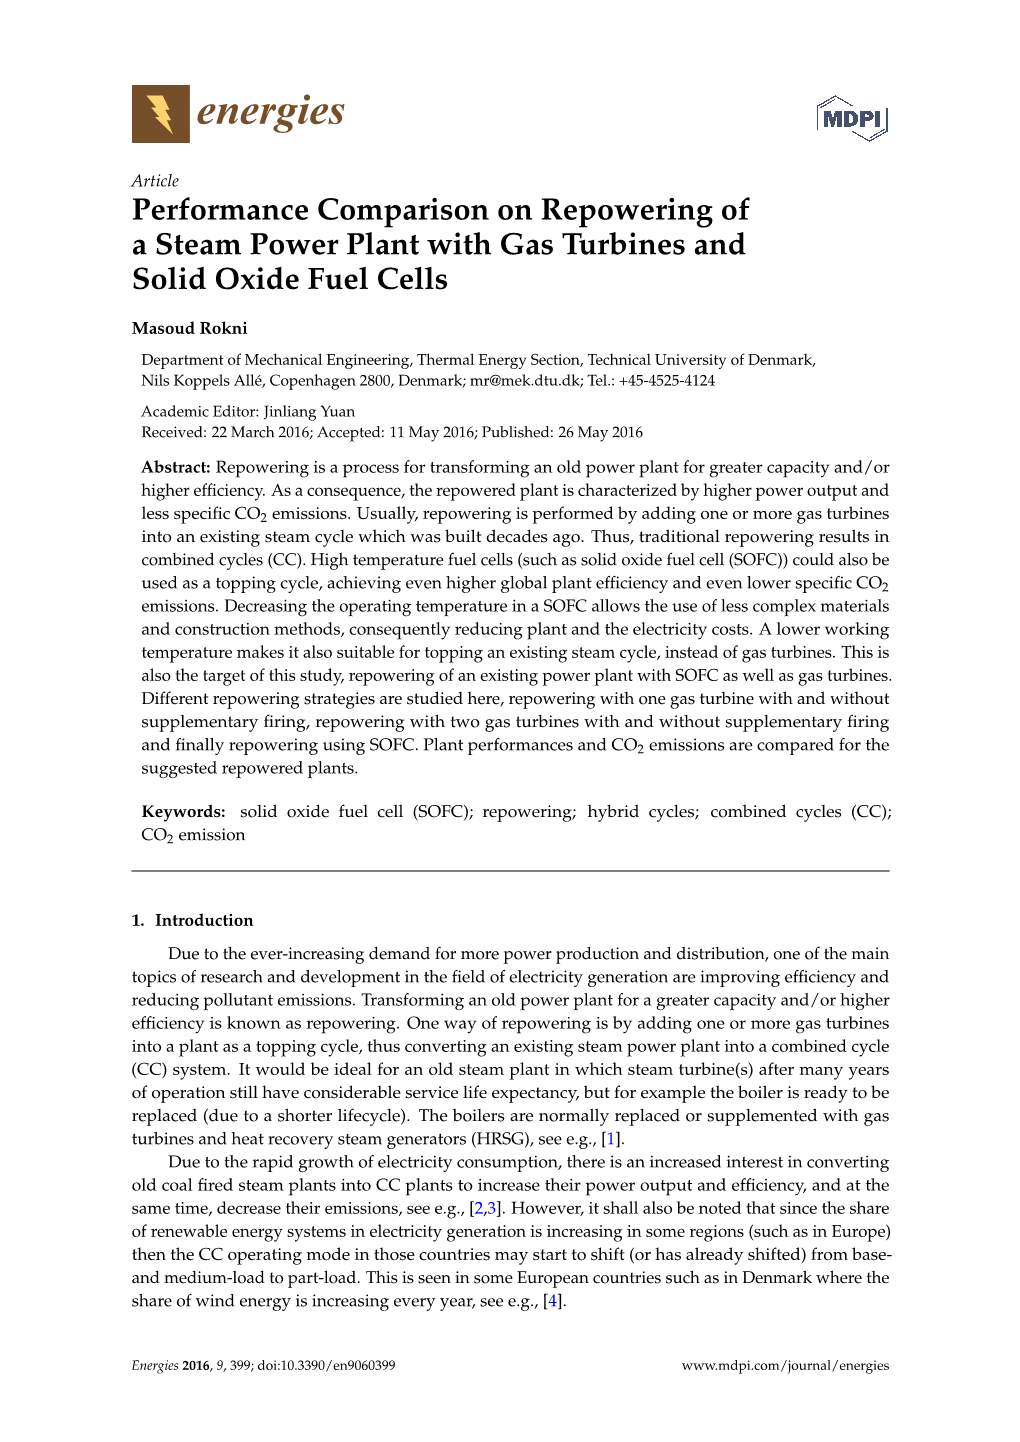 Performance Comparison on Repowering of a Steam Power Plant with Gas Turbines and Solid Oxide Fuel Cells